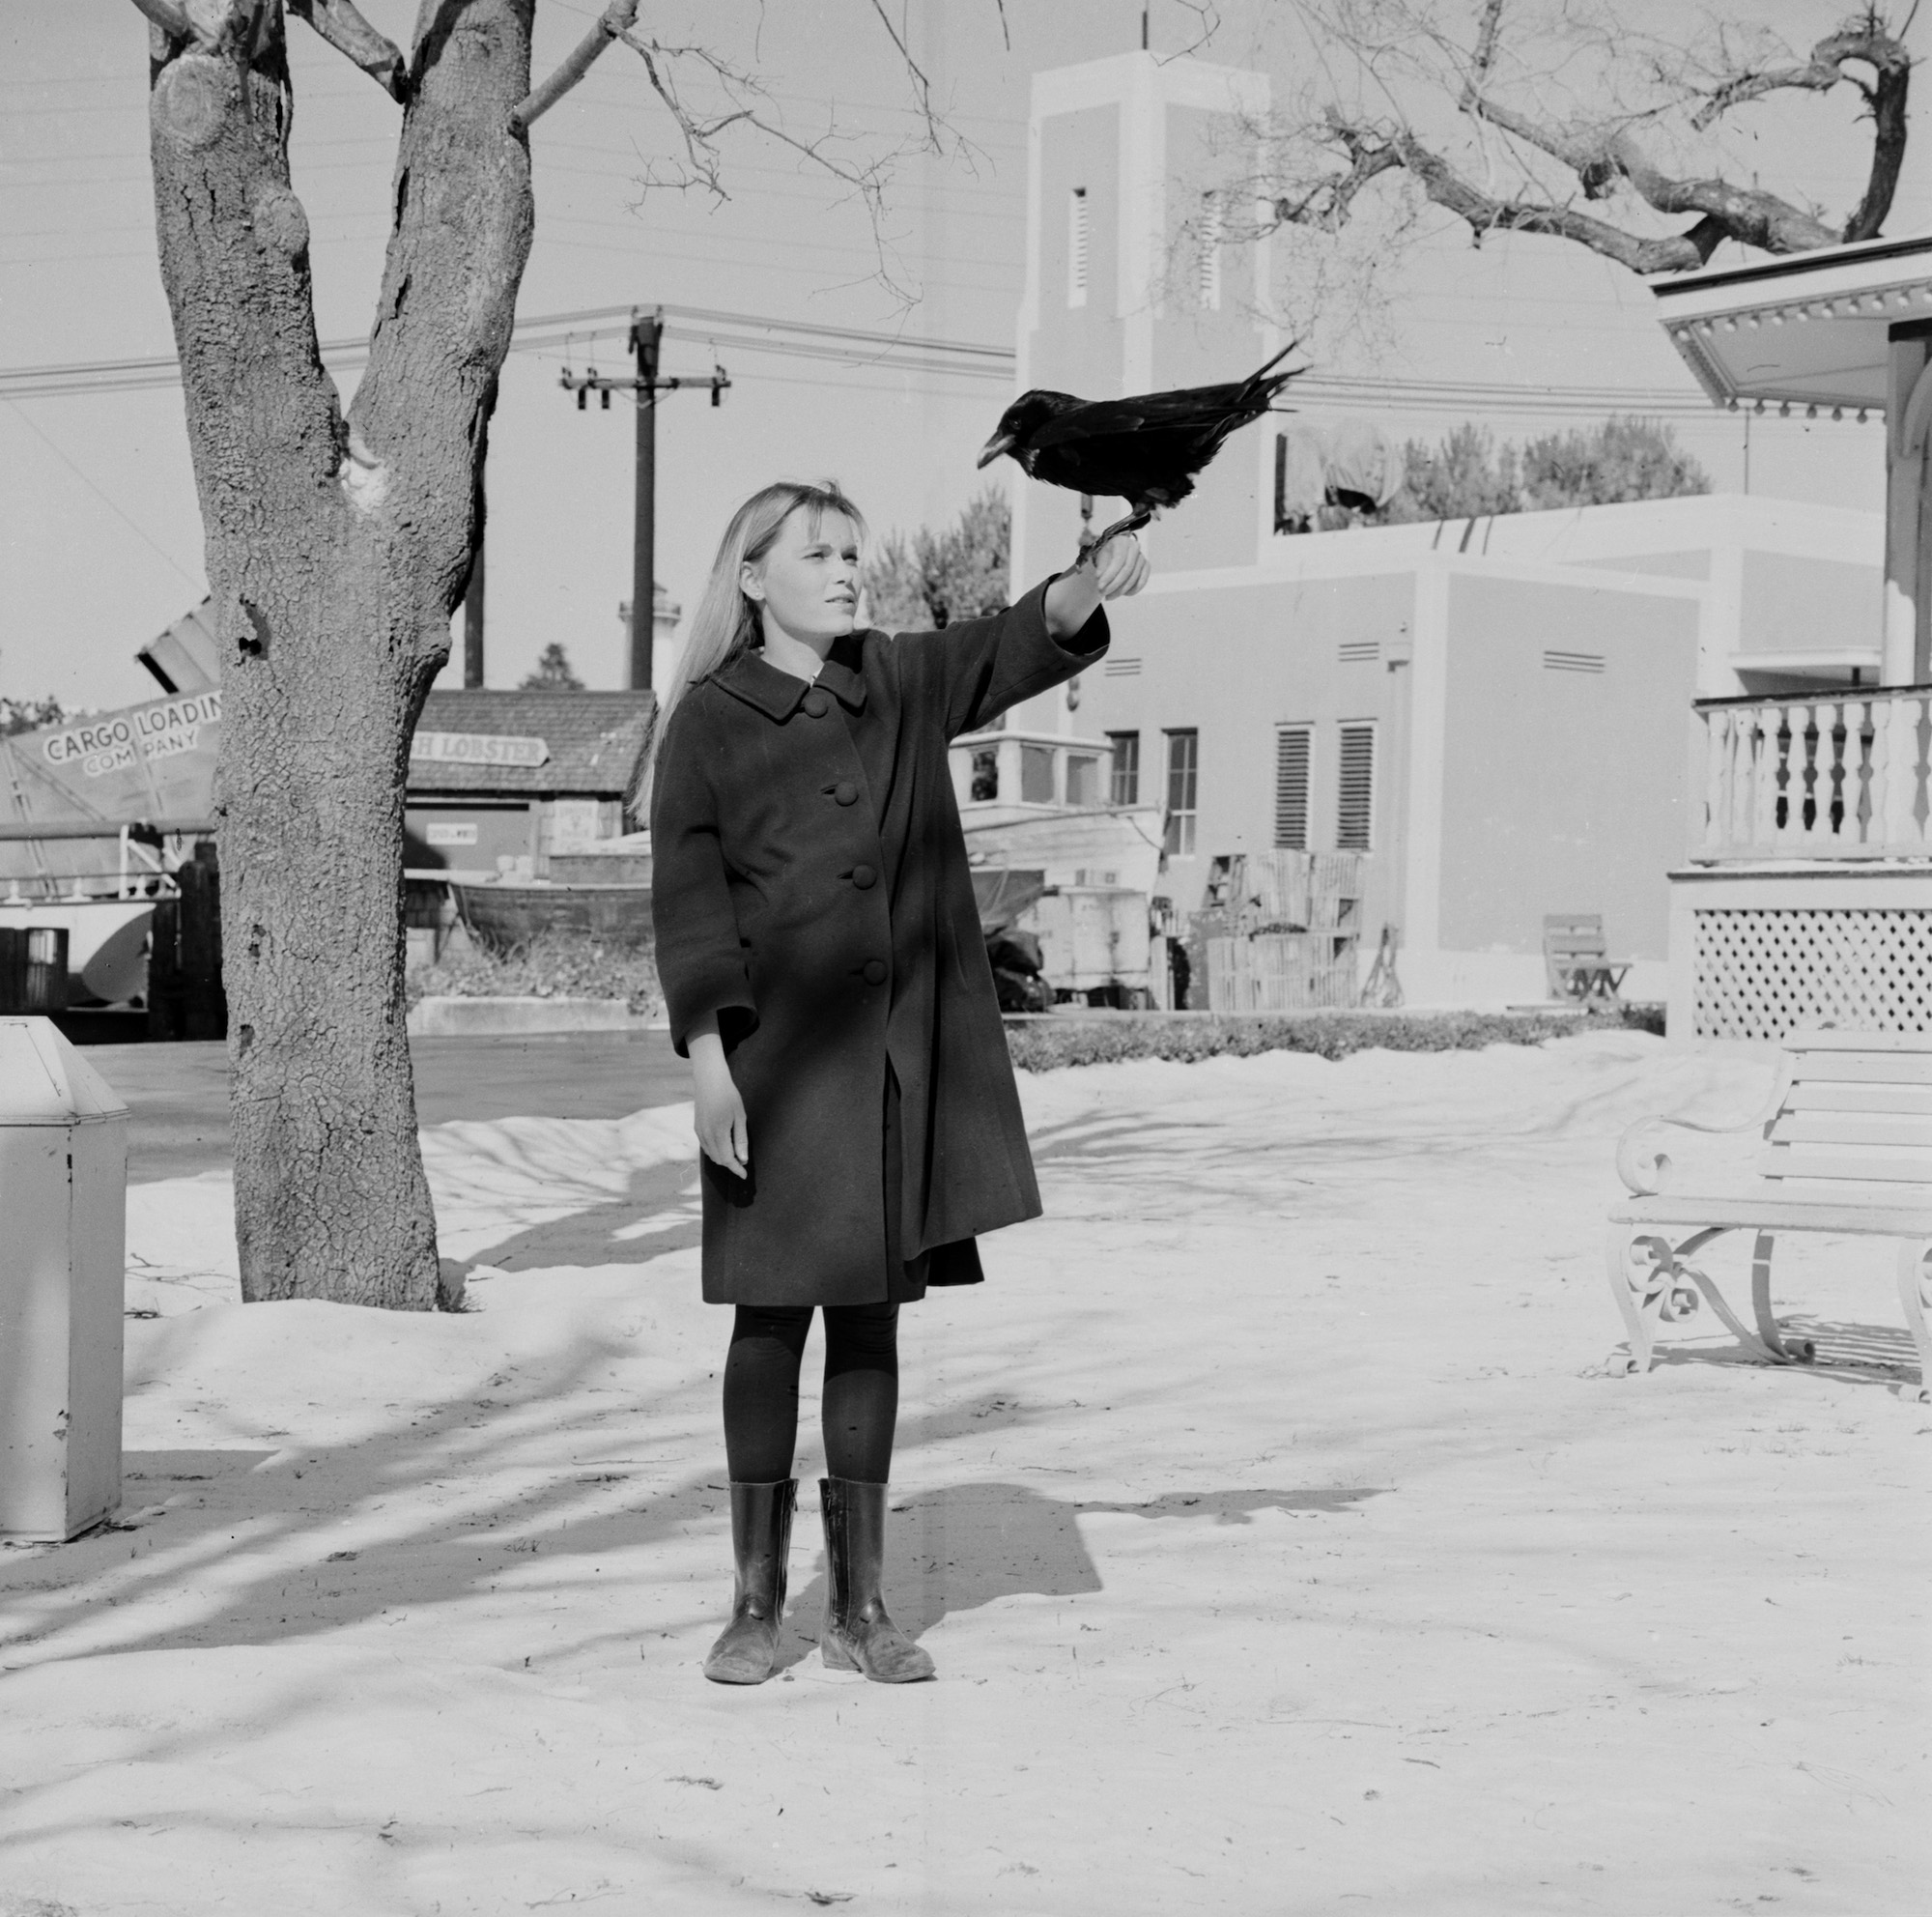 Mia Farrow posed with a crow perched on her arm